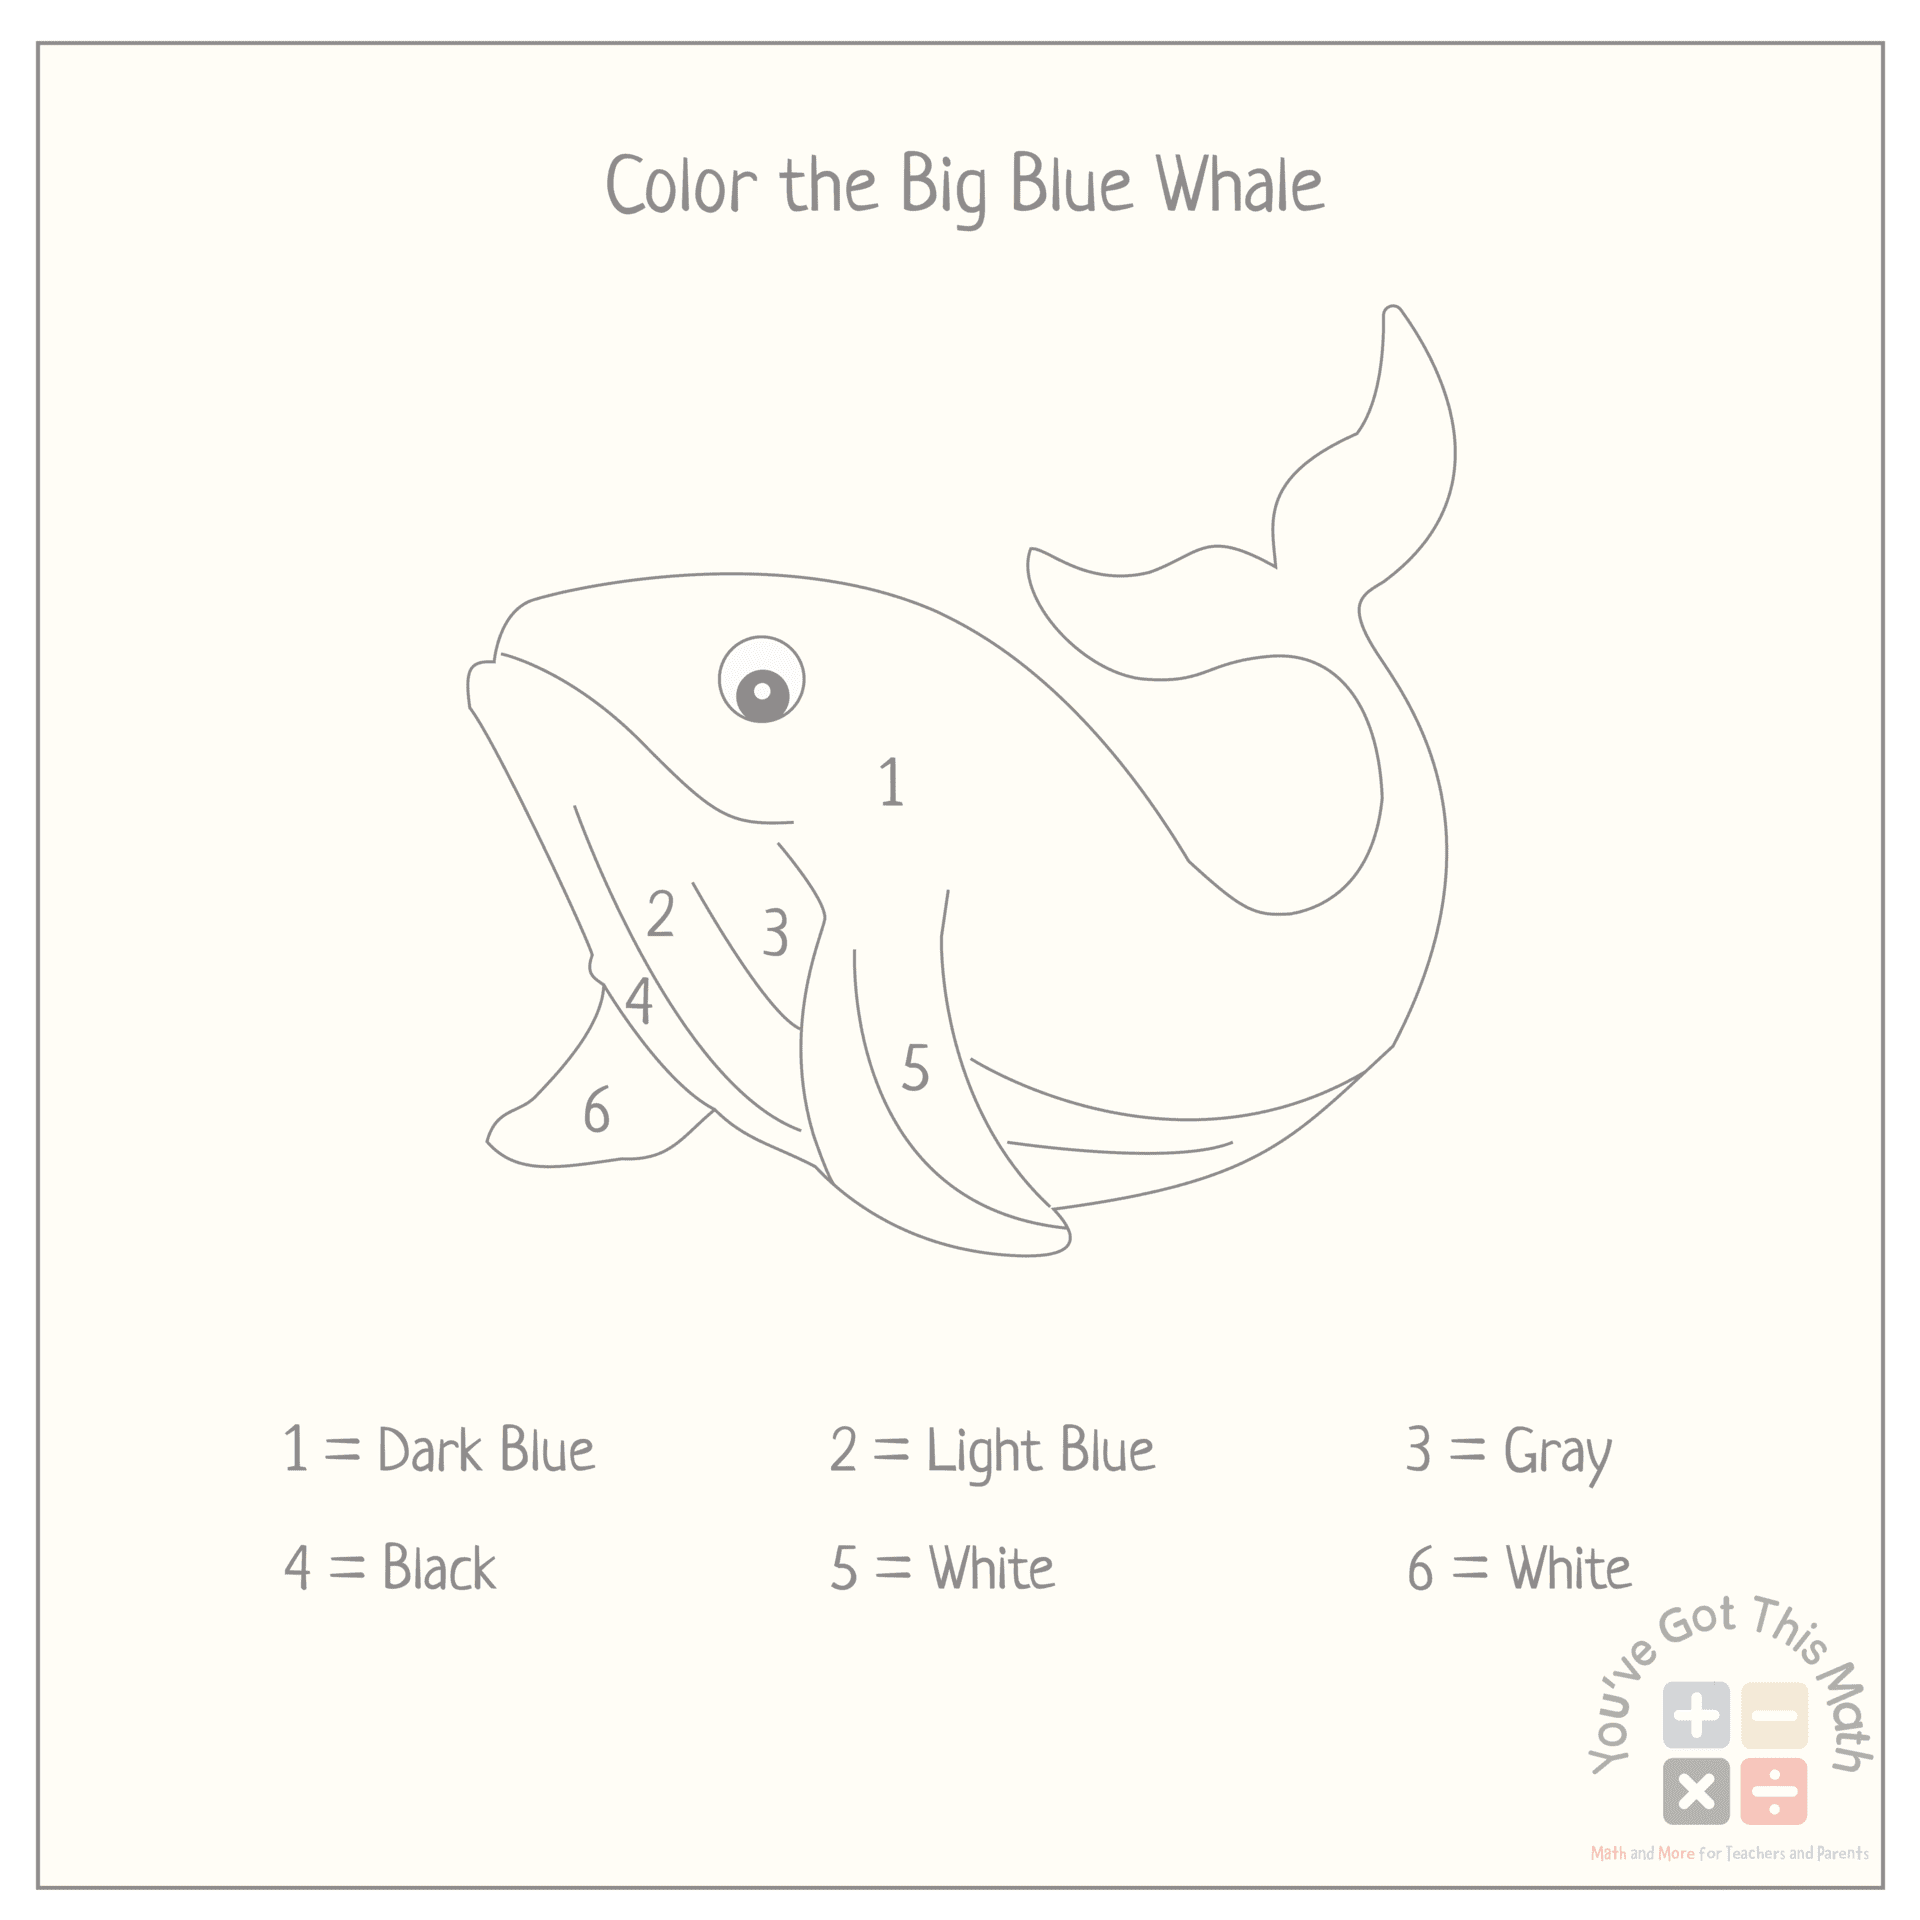 using numbers to color big blue whale